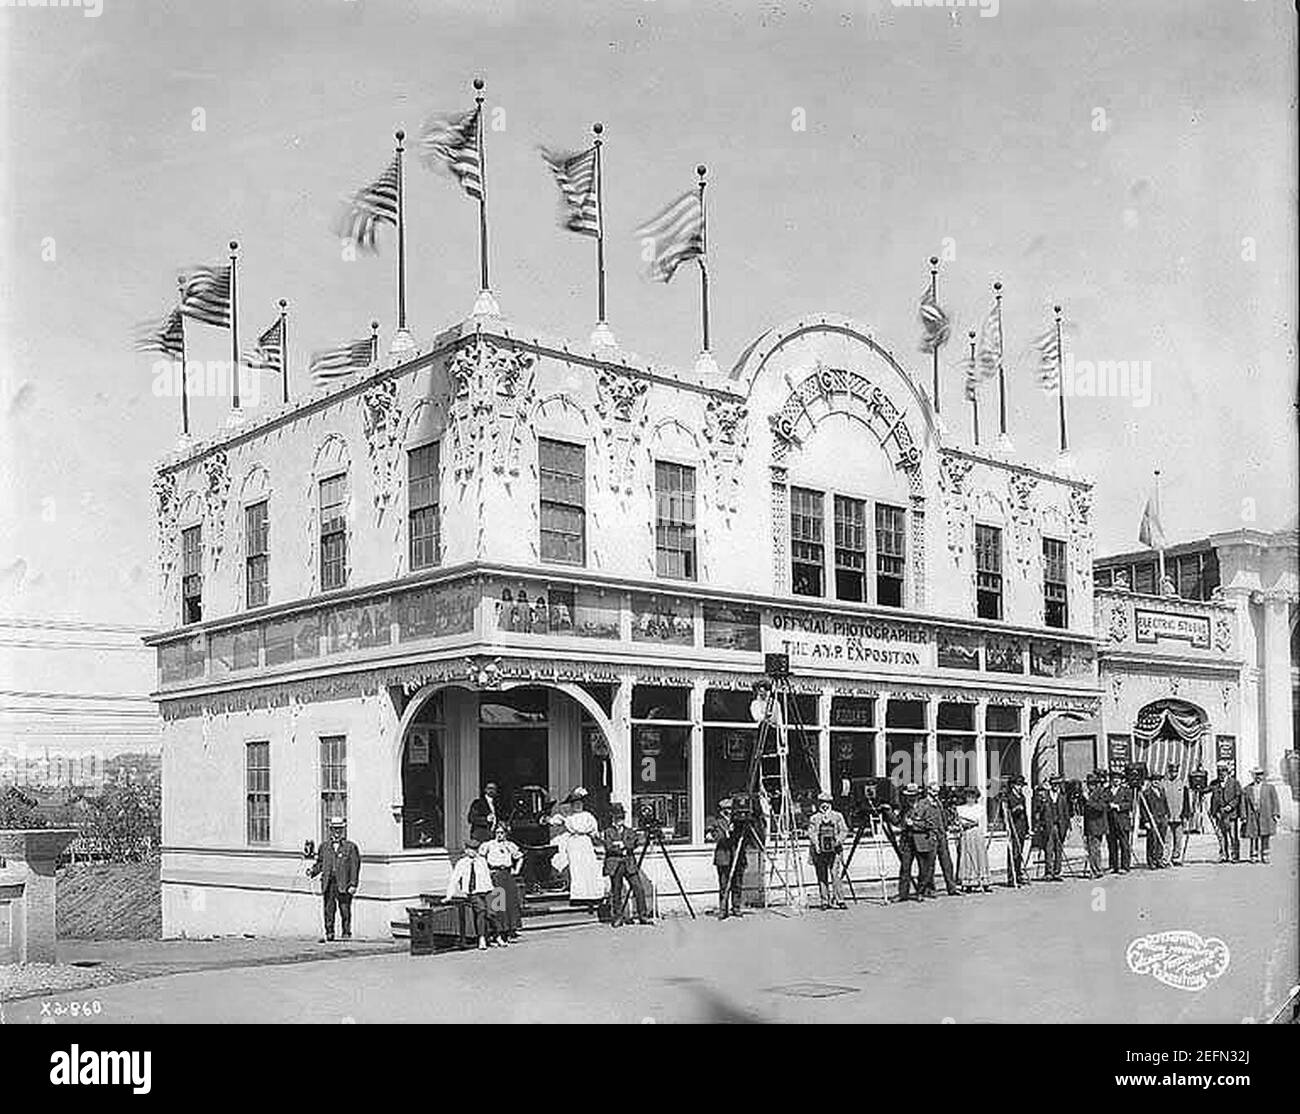 Official Photographer's Building exterior, showing photographers posing with their equipment, Alaska Yukon Pacific Exposition (AYP 338). Stock Photo